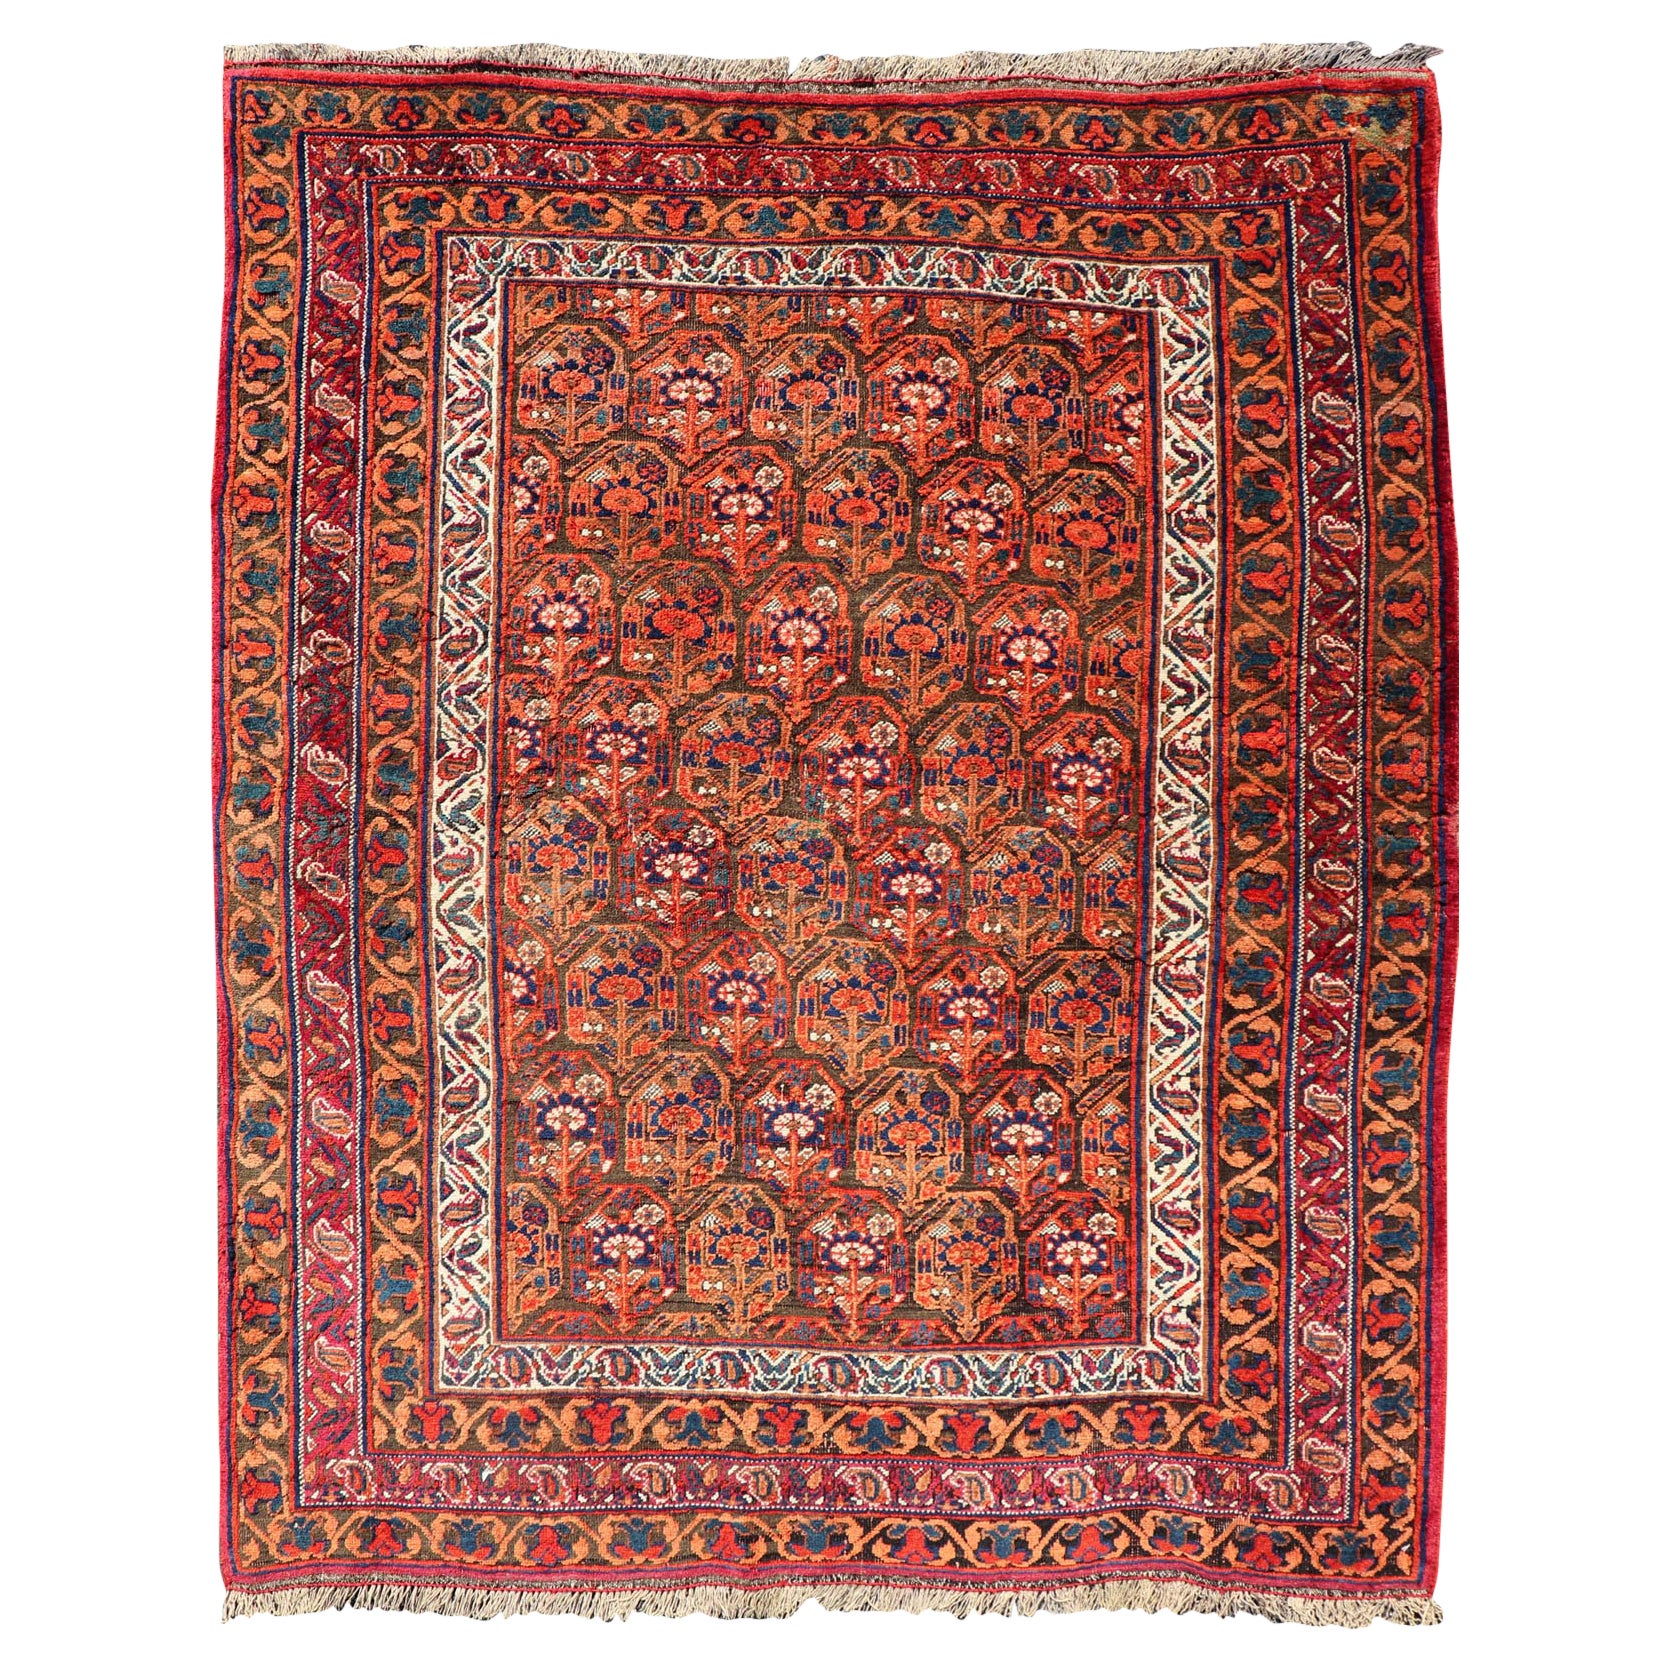  Fine Persian Antique Afshar Rug in Orange and Copper Background & Multi Colors For Sale